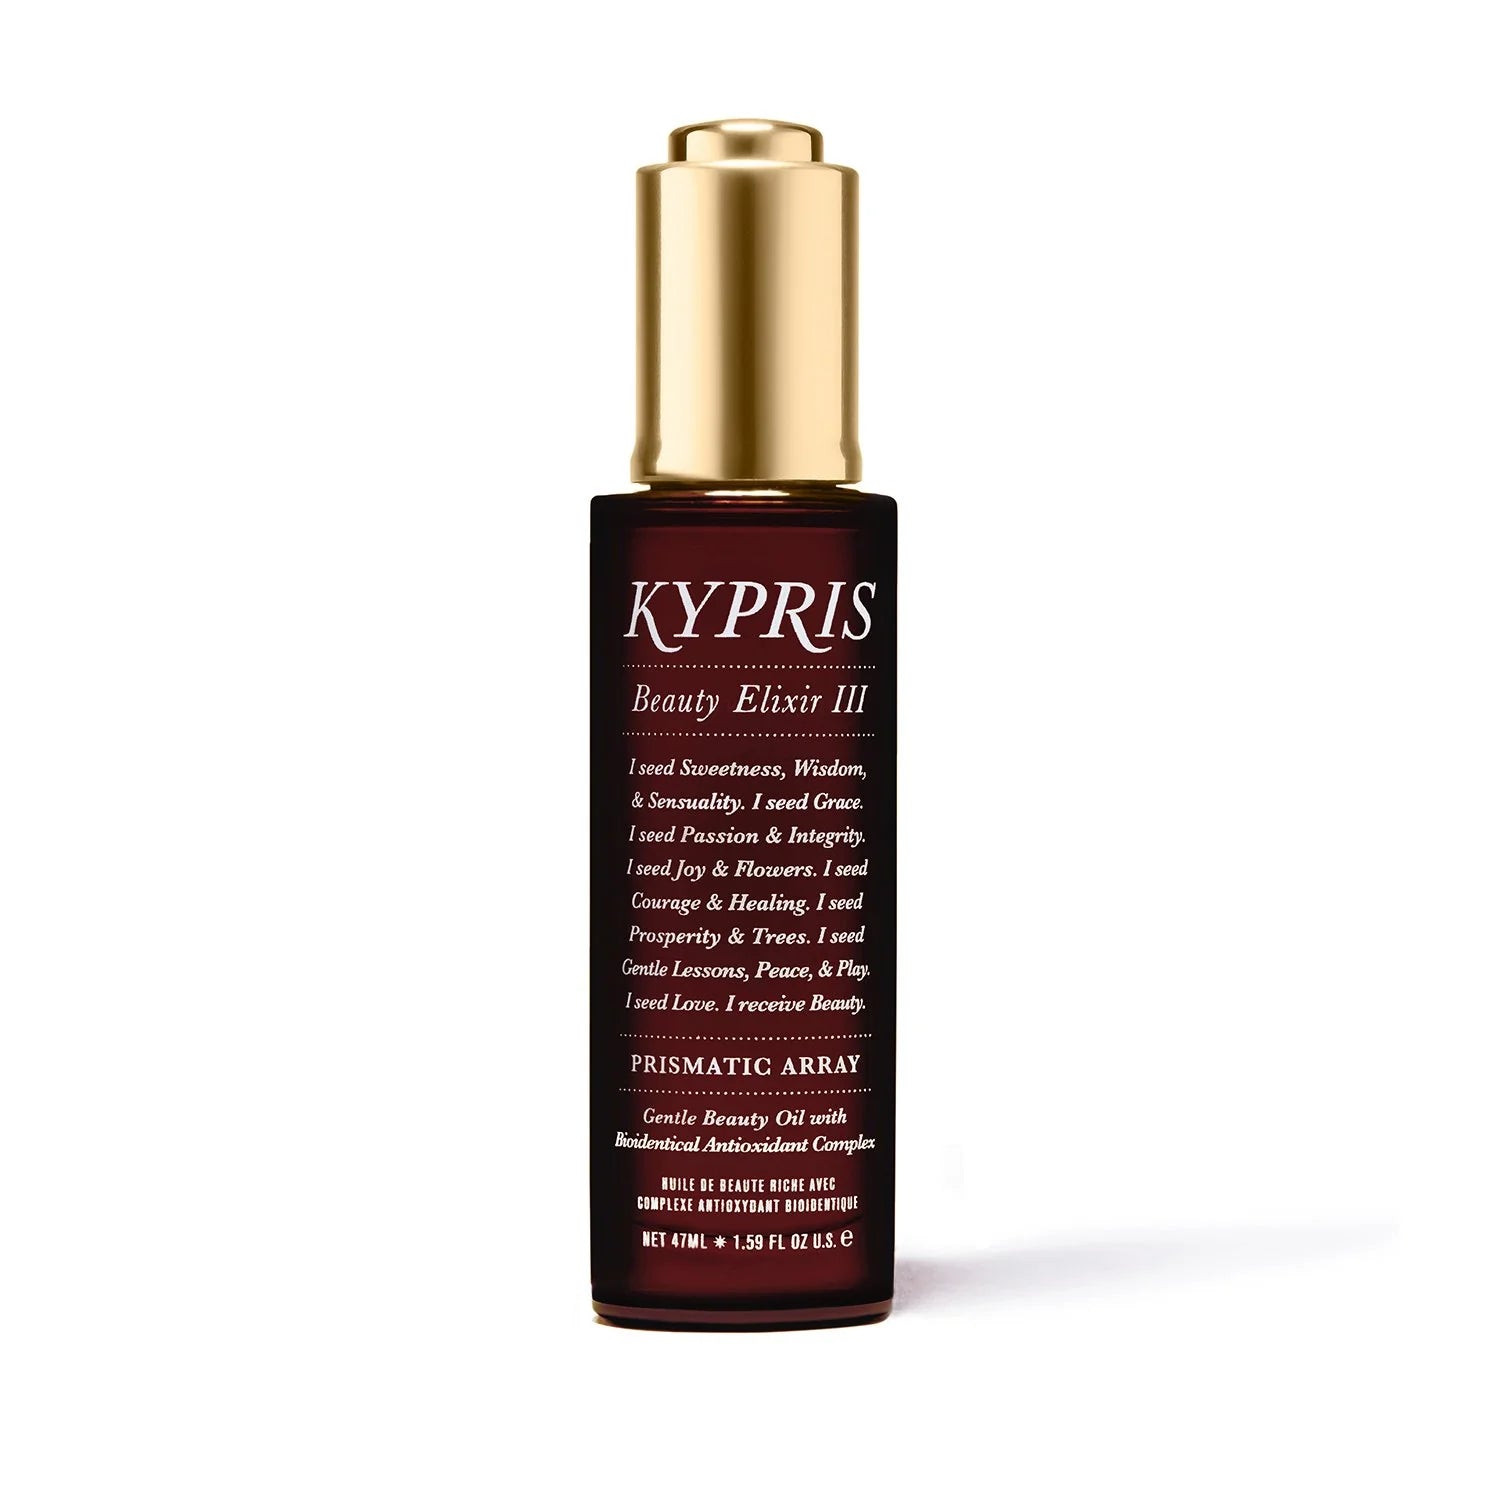 Daytime Microemulsion with Beauty Elixir III for Ultra Sentive or Scent Sensitive Skin